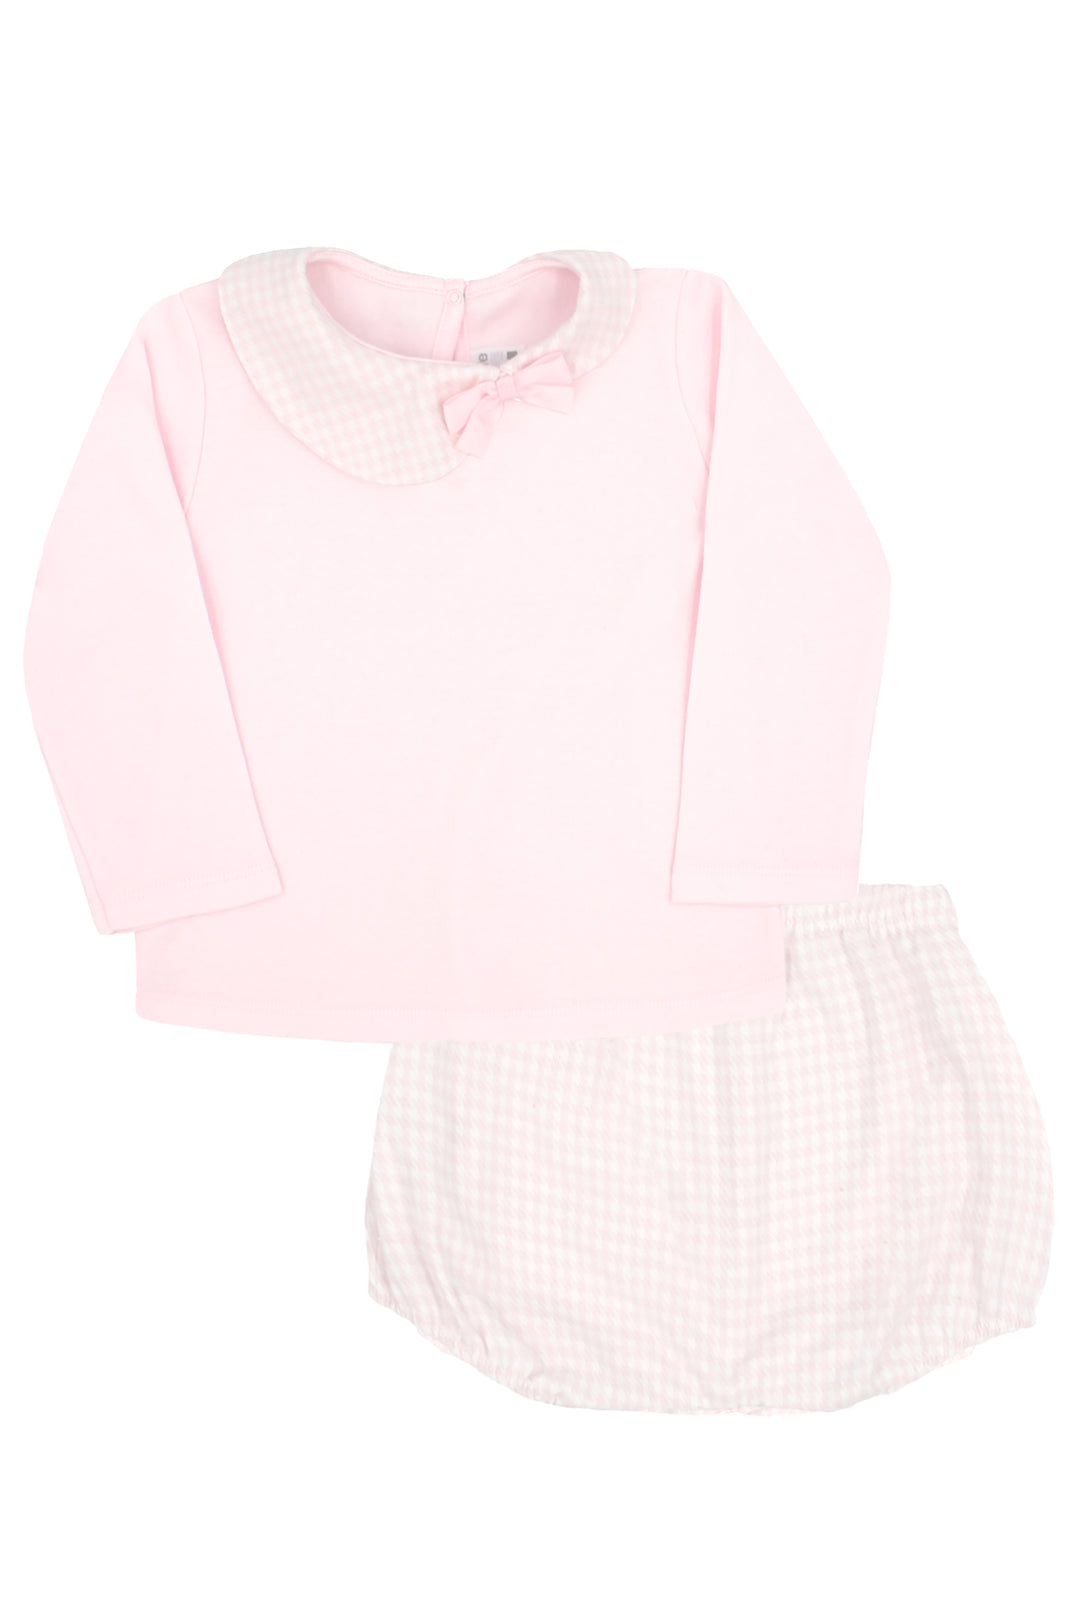 Rapife "Adalira" Pink Houndstooth Top & Bloomers | Millie and John